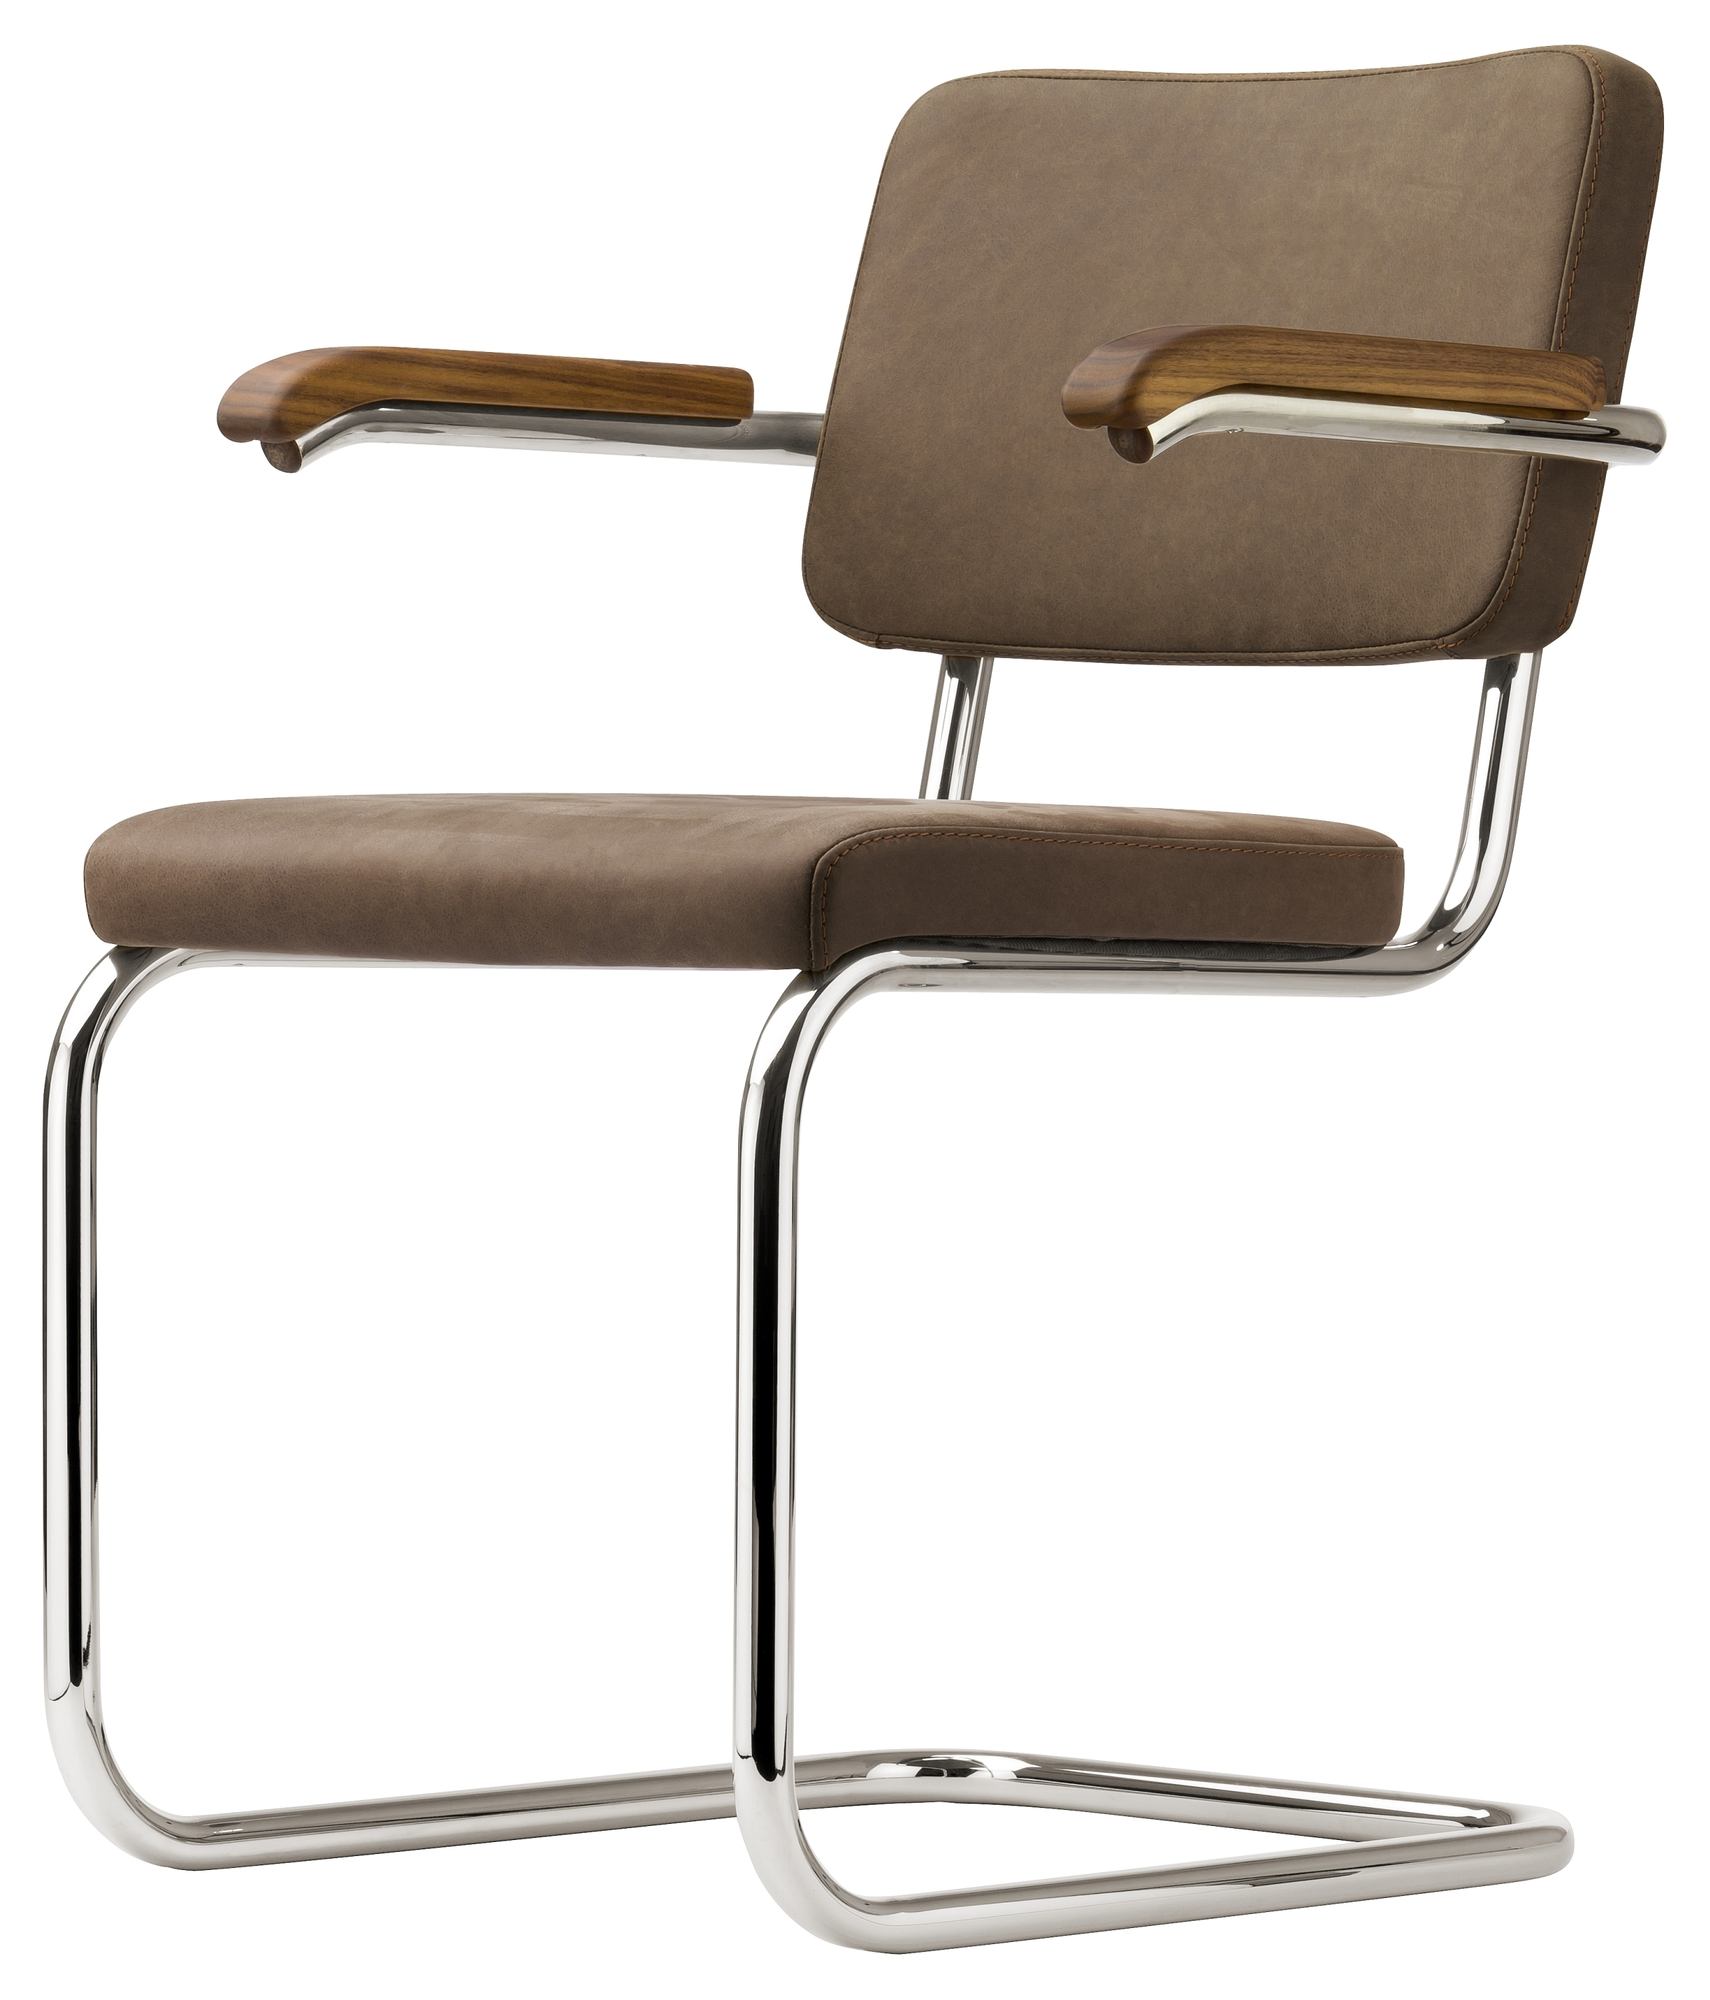 S 64 PV Tubular Steel Classic Cantilever Thonet